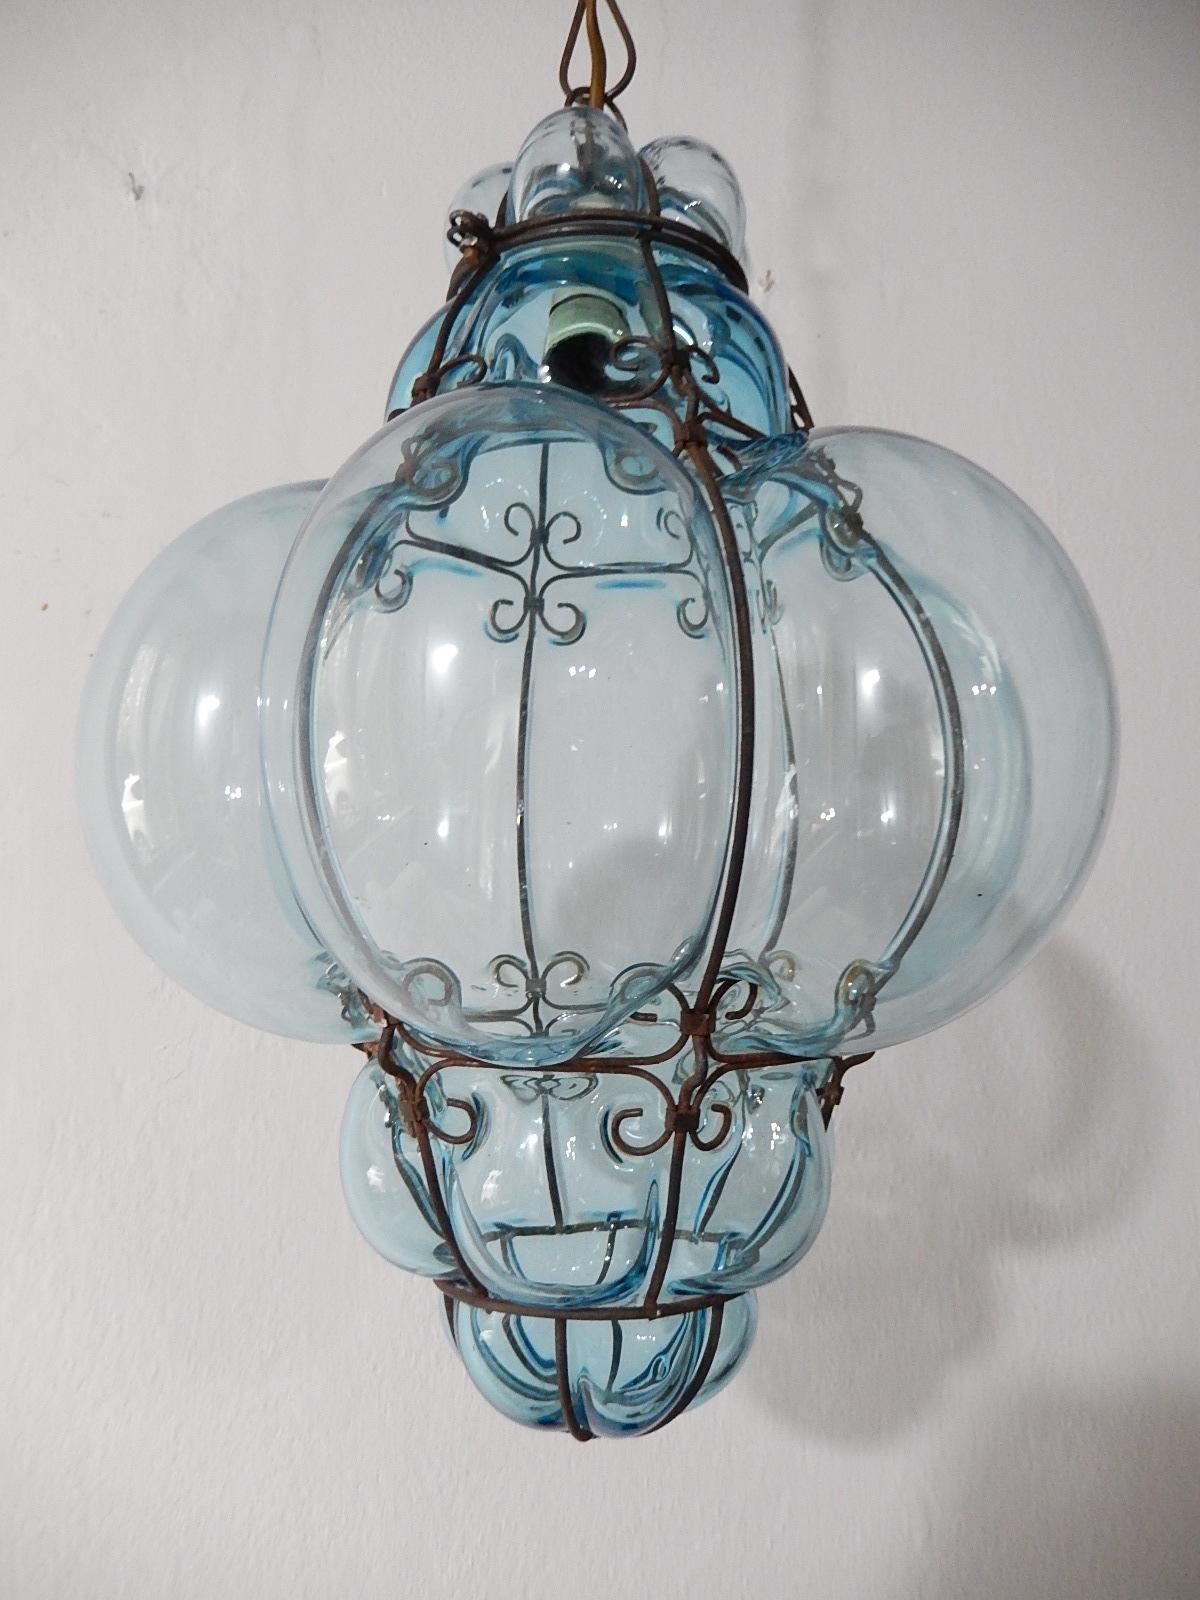 Housing one-light. Rare aqua Murano blown glass. Great craftsmanship. Re-wired and ready to hang. Free priority shipping from Italy. Adding another 20 inches (can be shortened) of original chain and canopy.